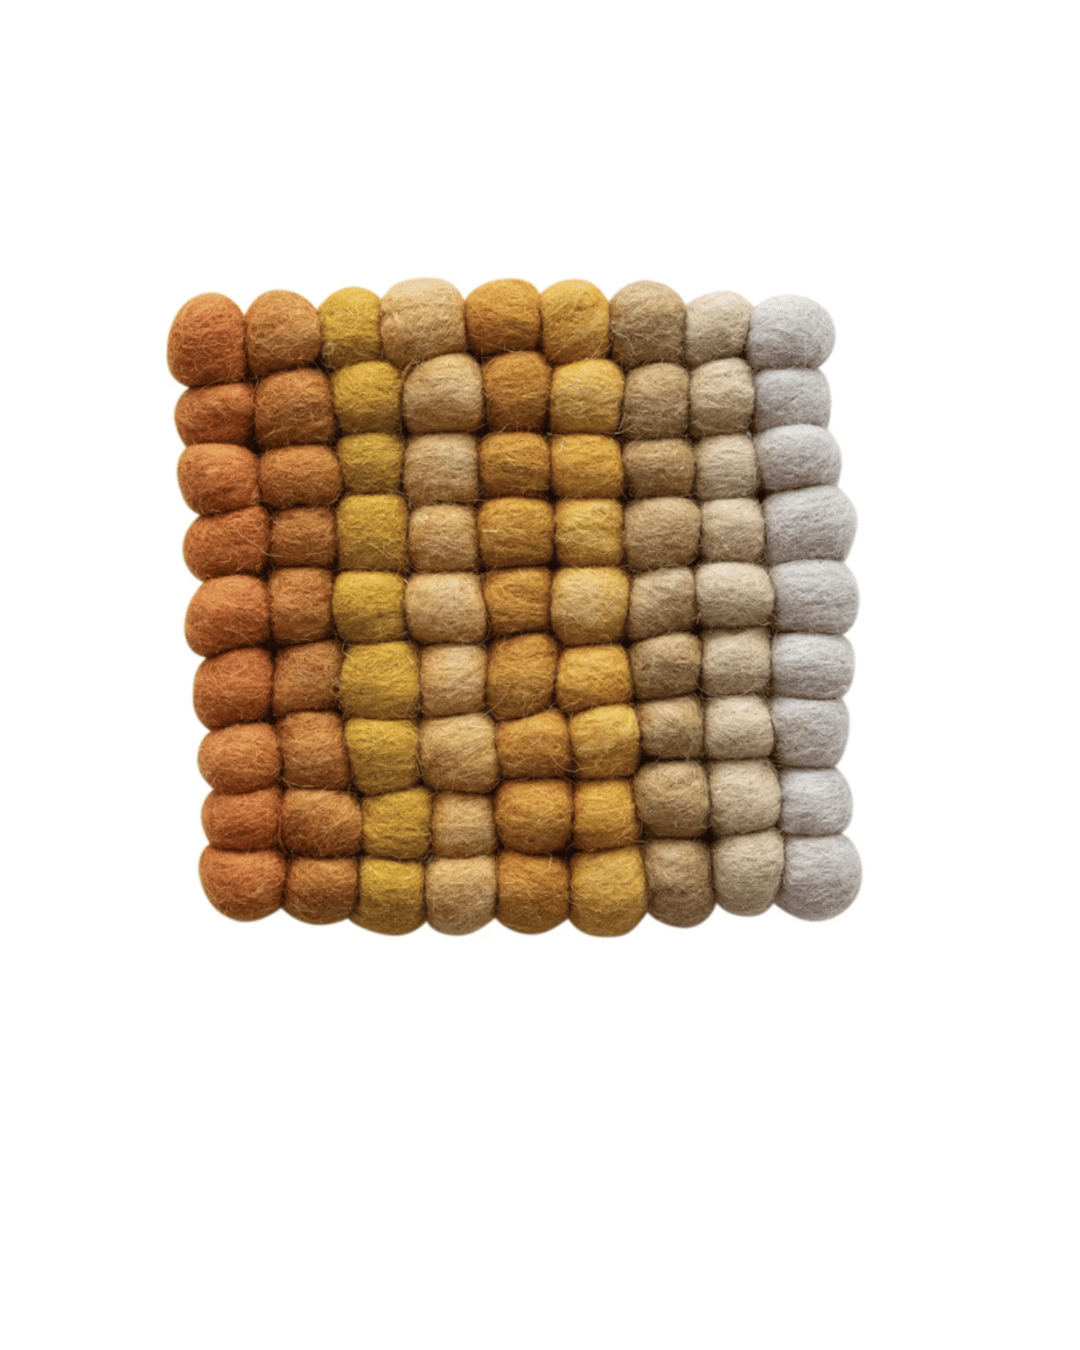 A rectangular arrangement of Creative Co-op&#39;s Handmade Wool Felt Ball Trivet Multi Color Yellow, in shades of brown, yellow, and gray, evoking the earthy tones of a Scottsdale Arizona bungalow, creating a gradient pattern from left to right.